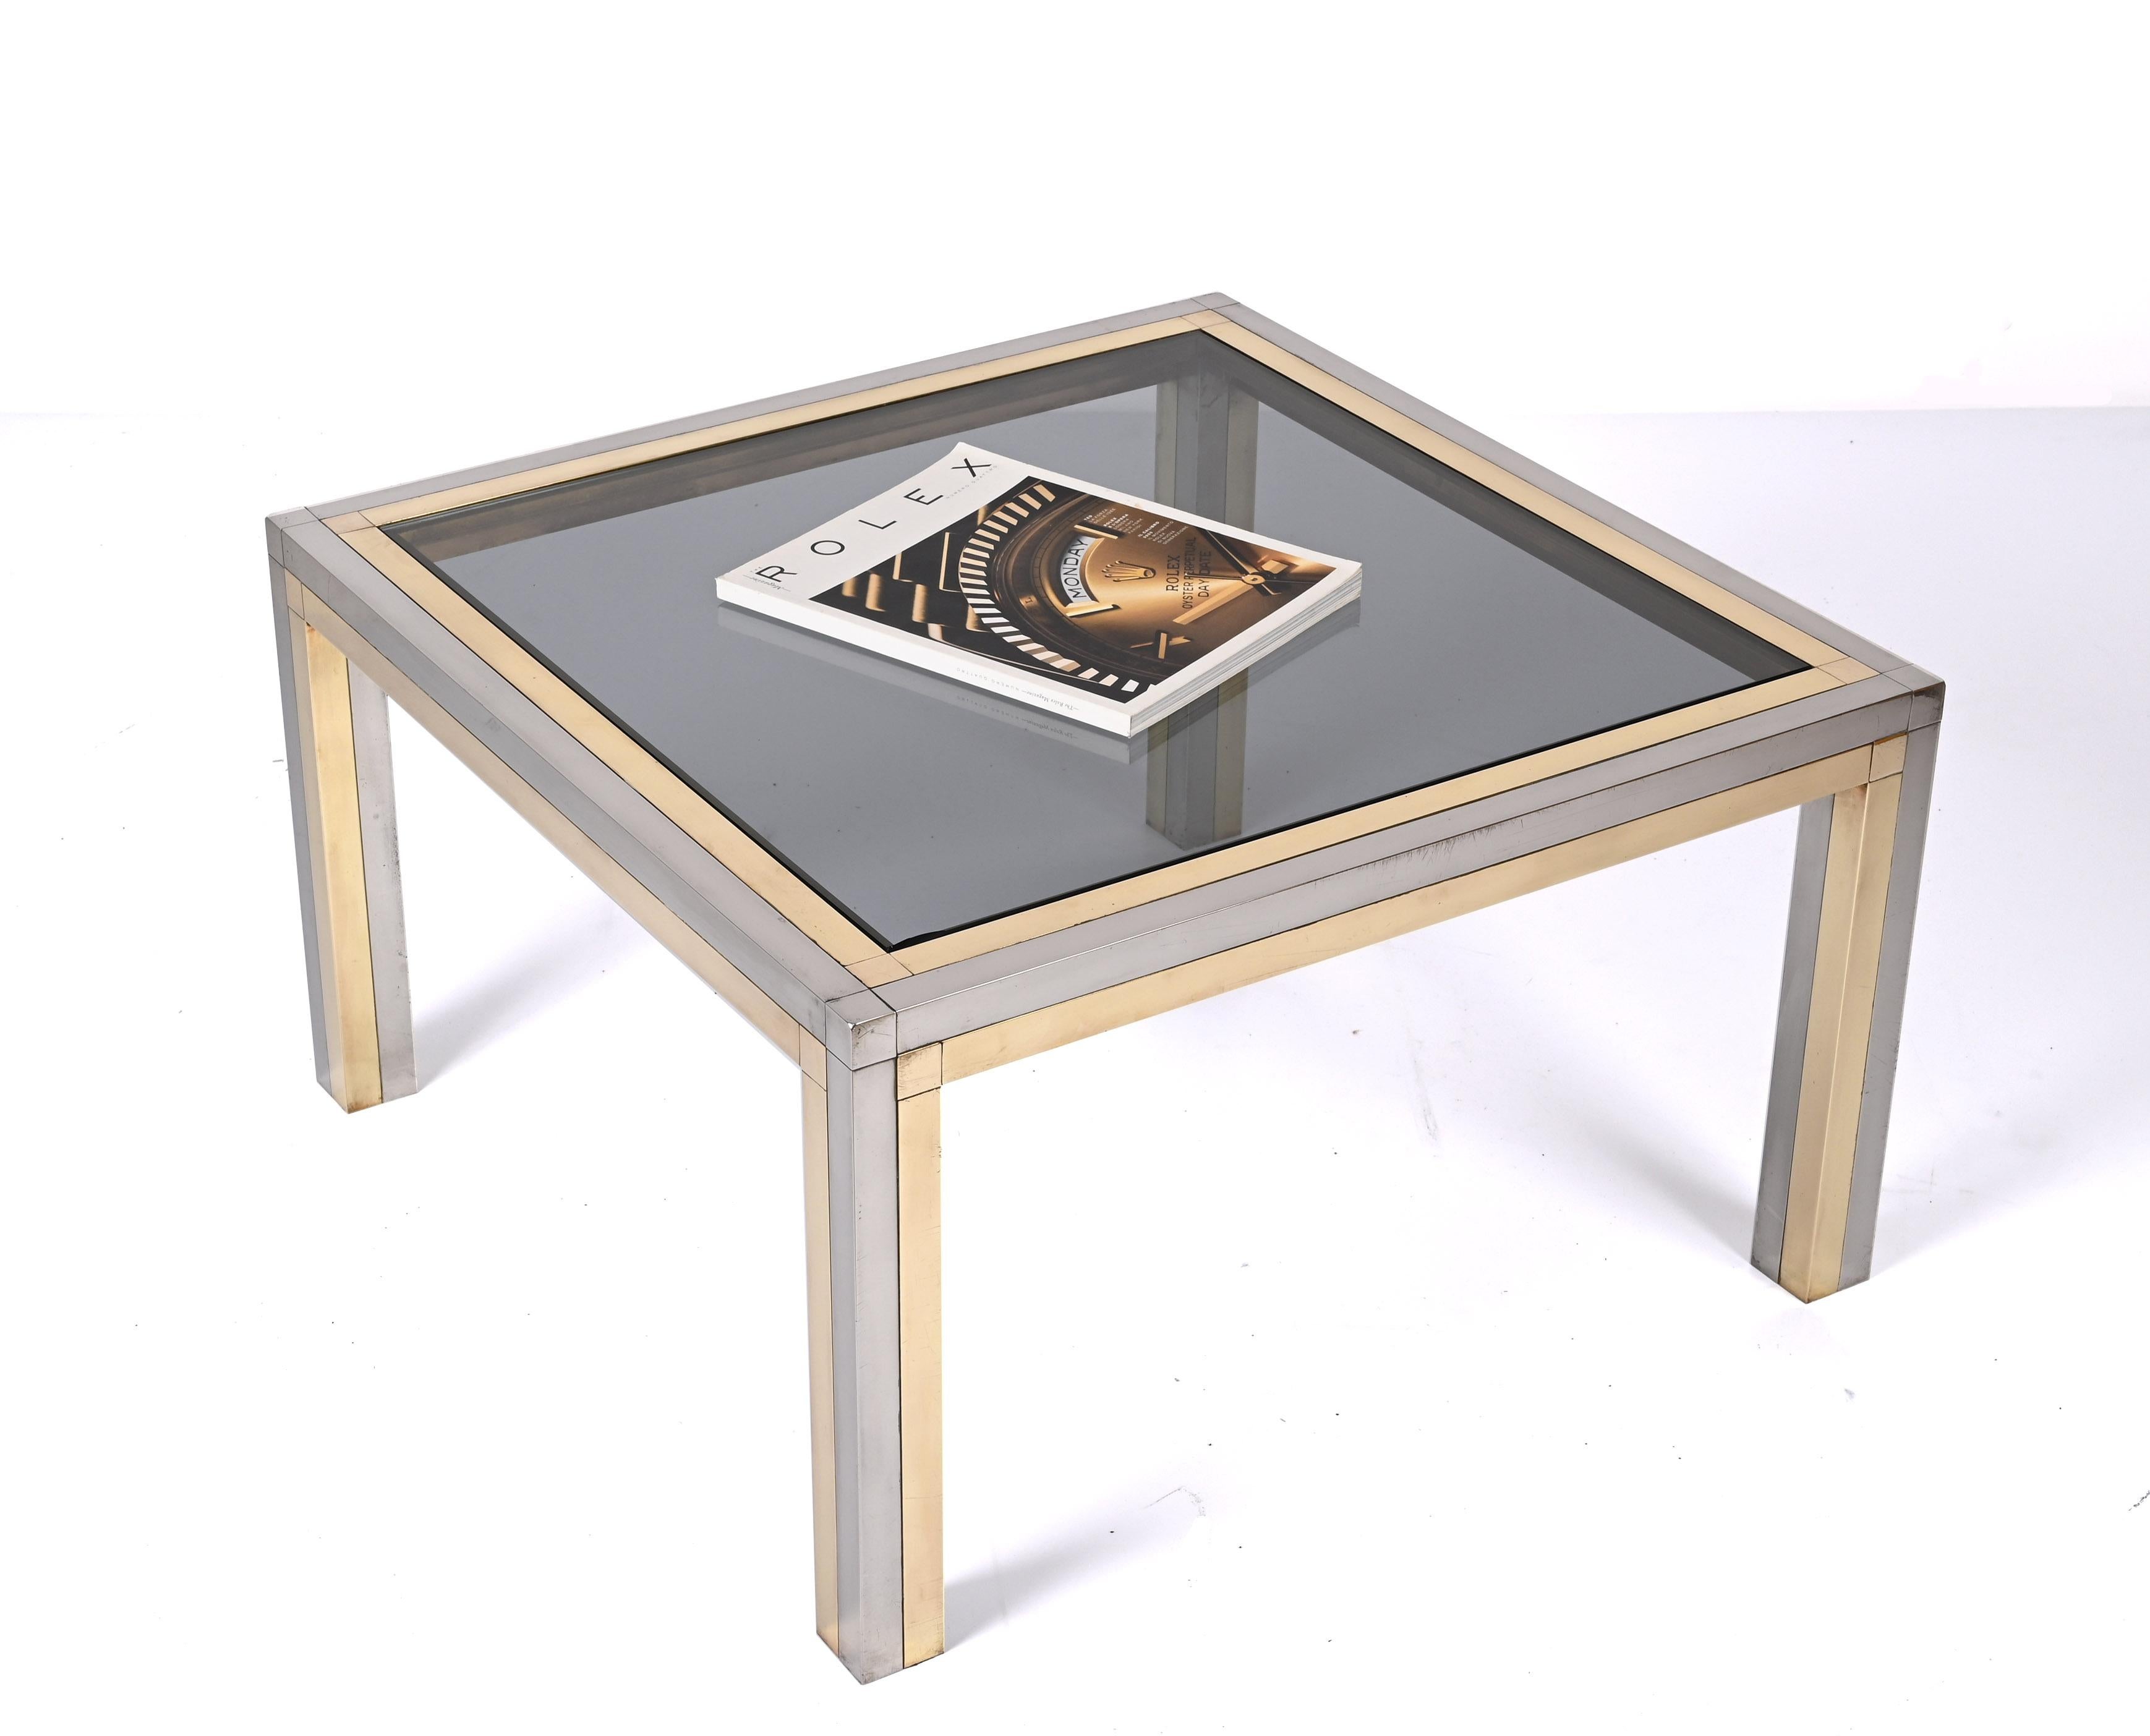 Romeo Rega Brass, Chrome and Smoked Glass Square Italian Coffee Table, 1970s For Sale 6